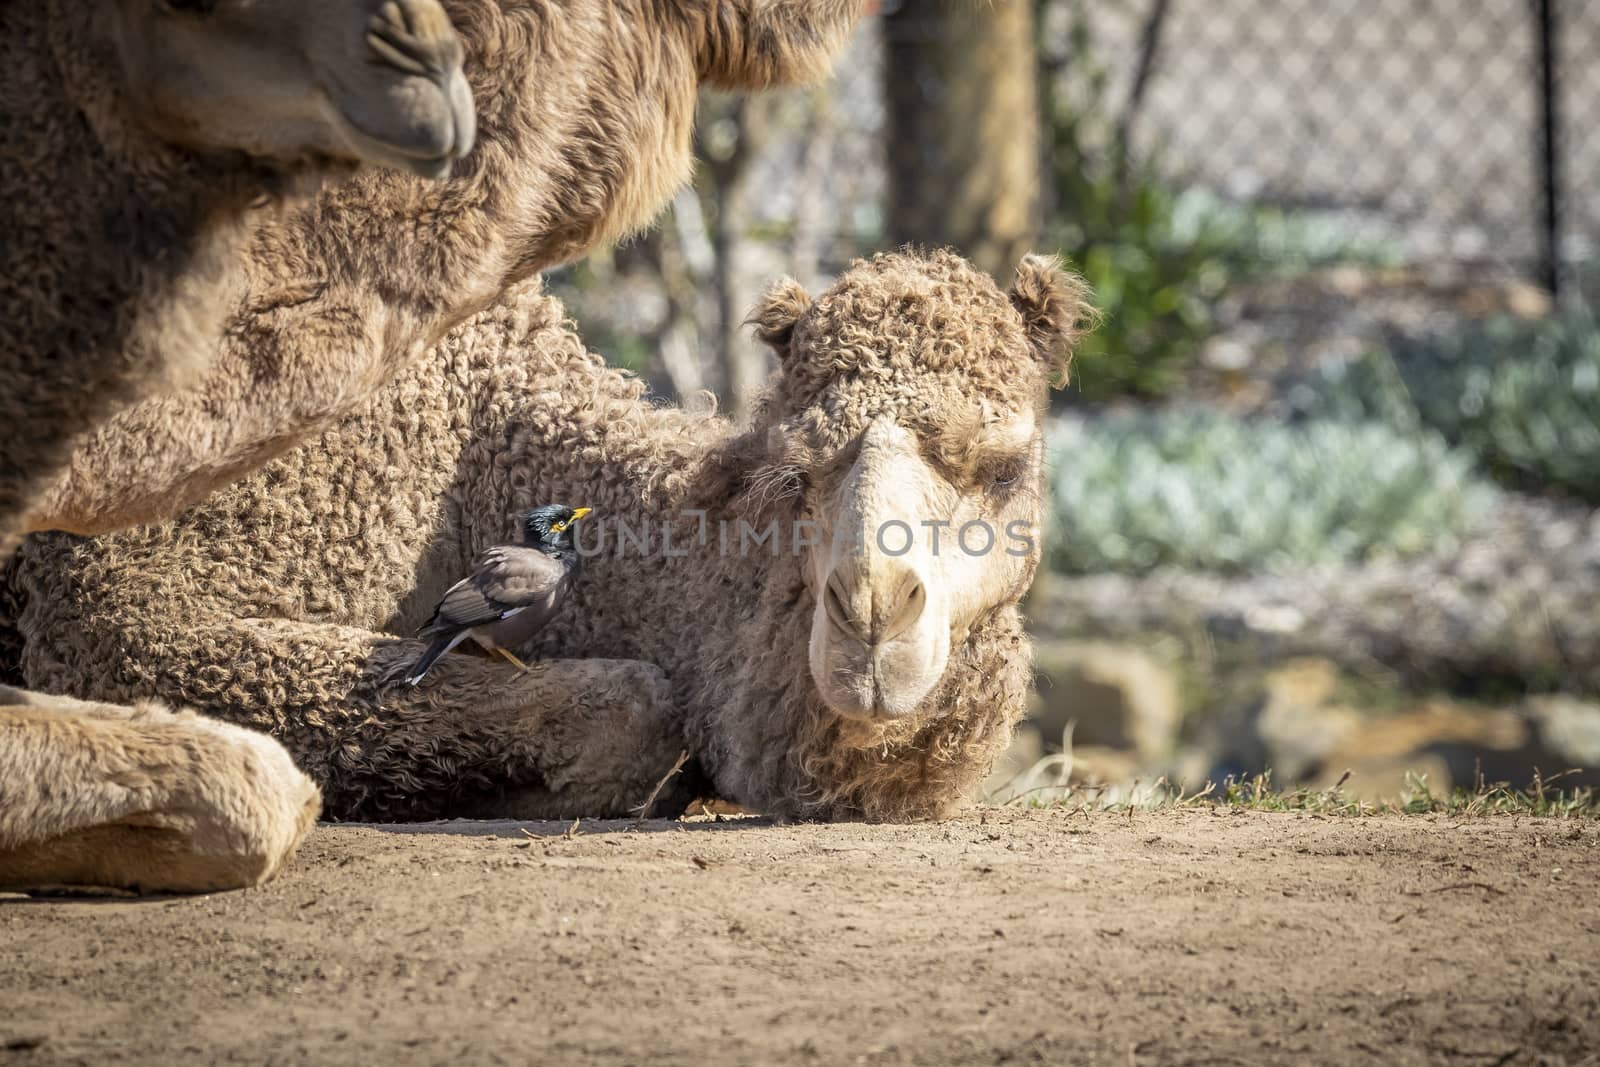 A small bird sitting on the leg of a brown Camel